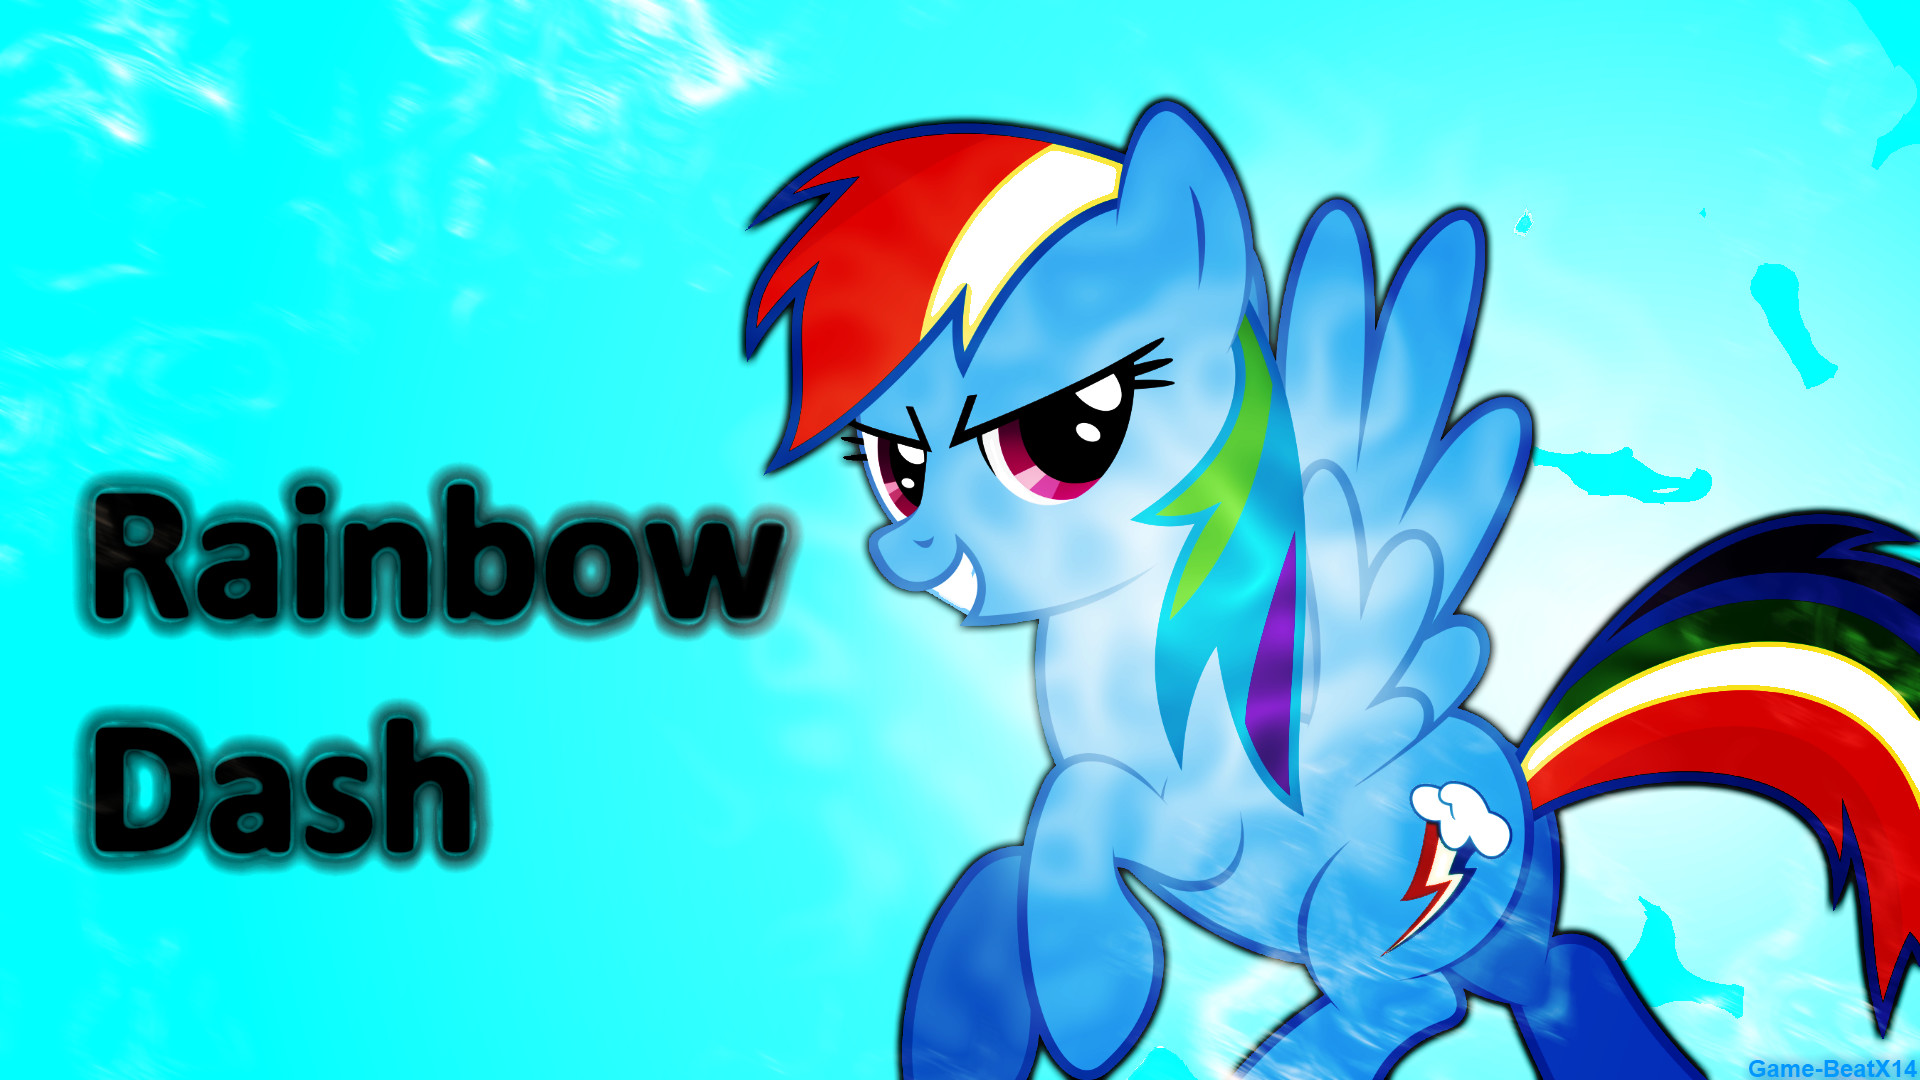 1920x1080 Rainbow Dash Wallpaper by Fehlung and Game-BeatX14